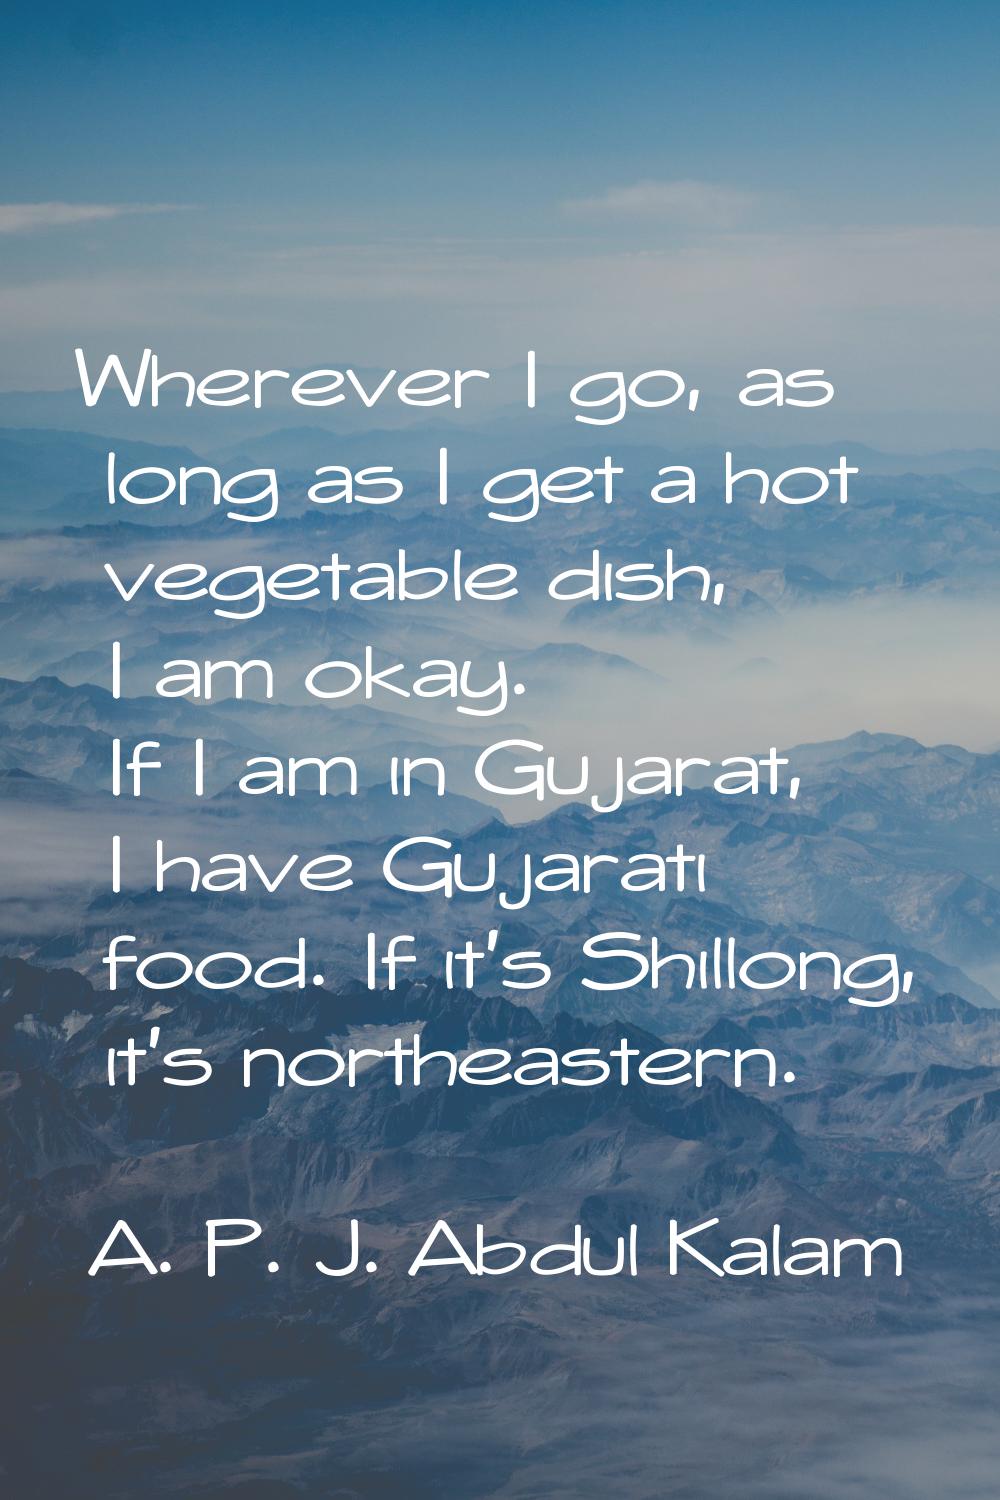 Wherever I go, as long as I get a hot vegetable dish, I am okay. If I am in Gujarat, I have Gujarat